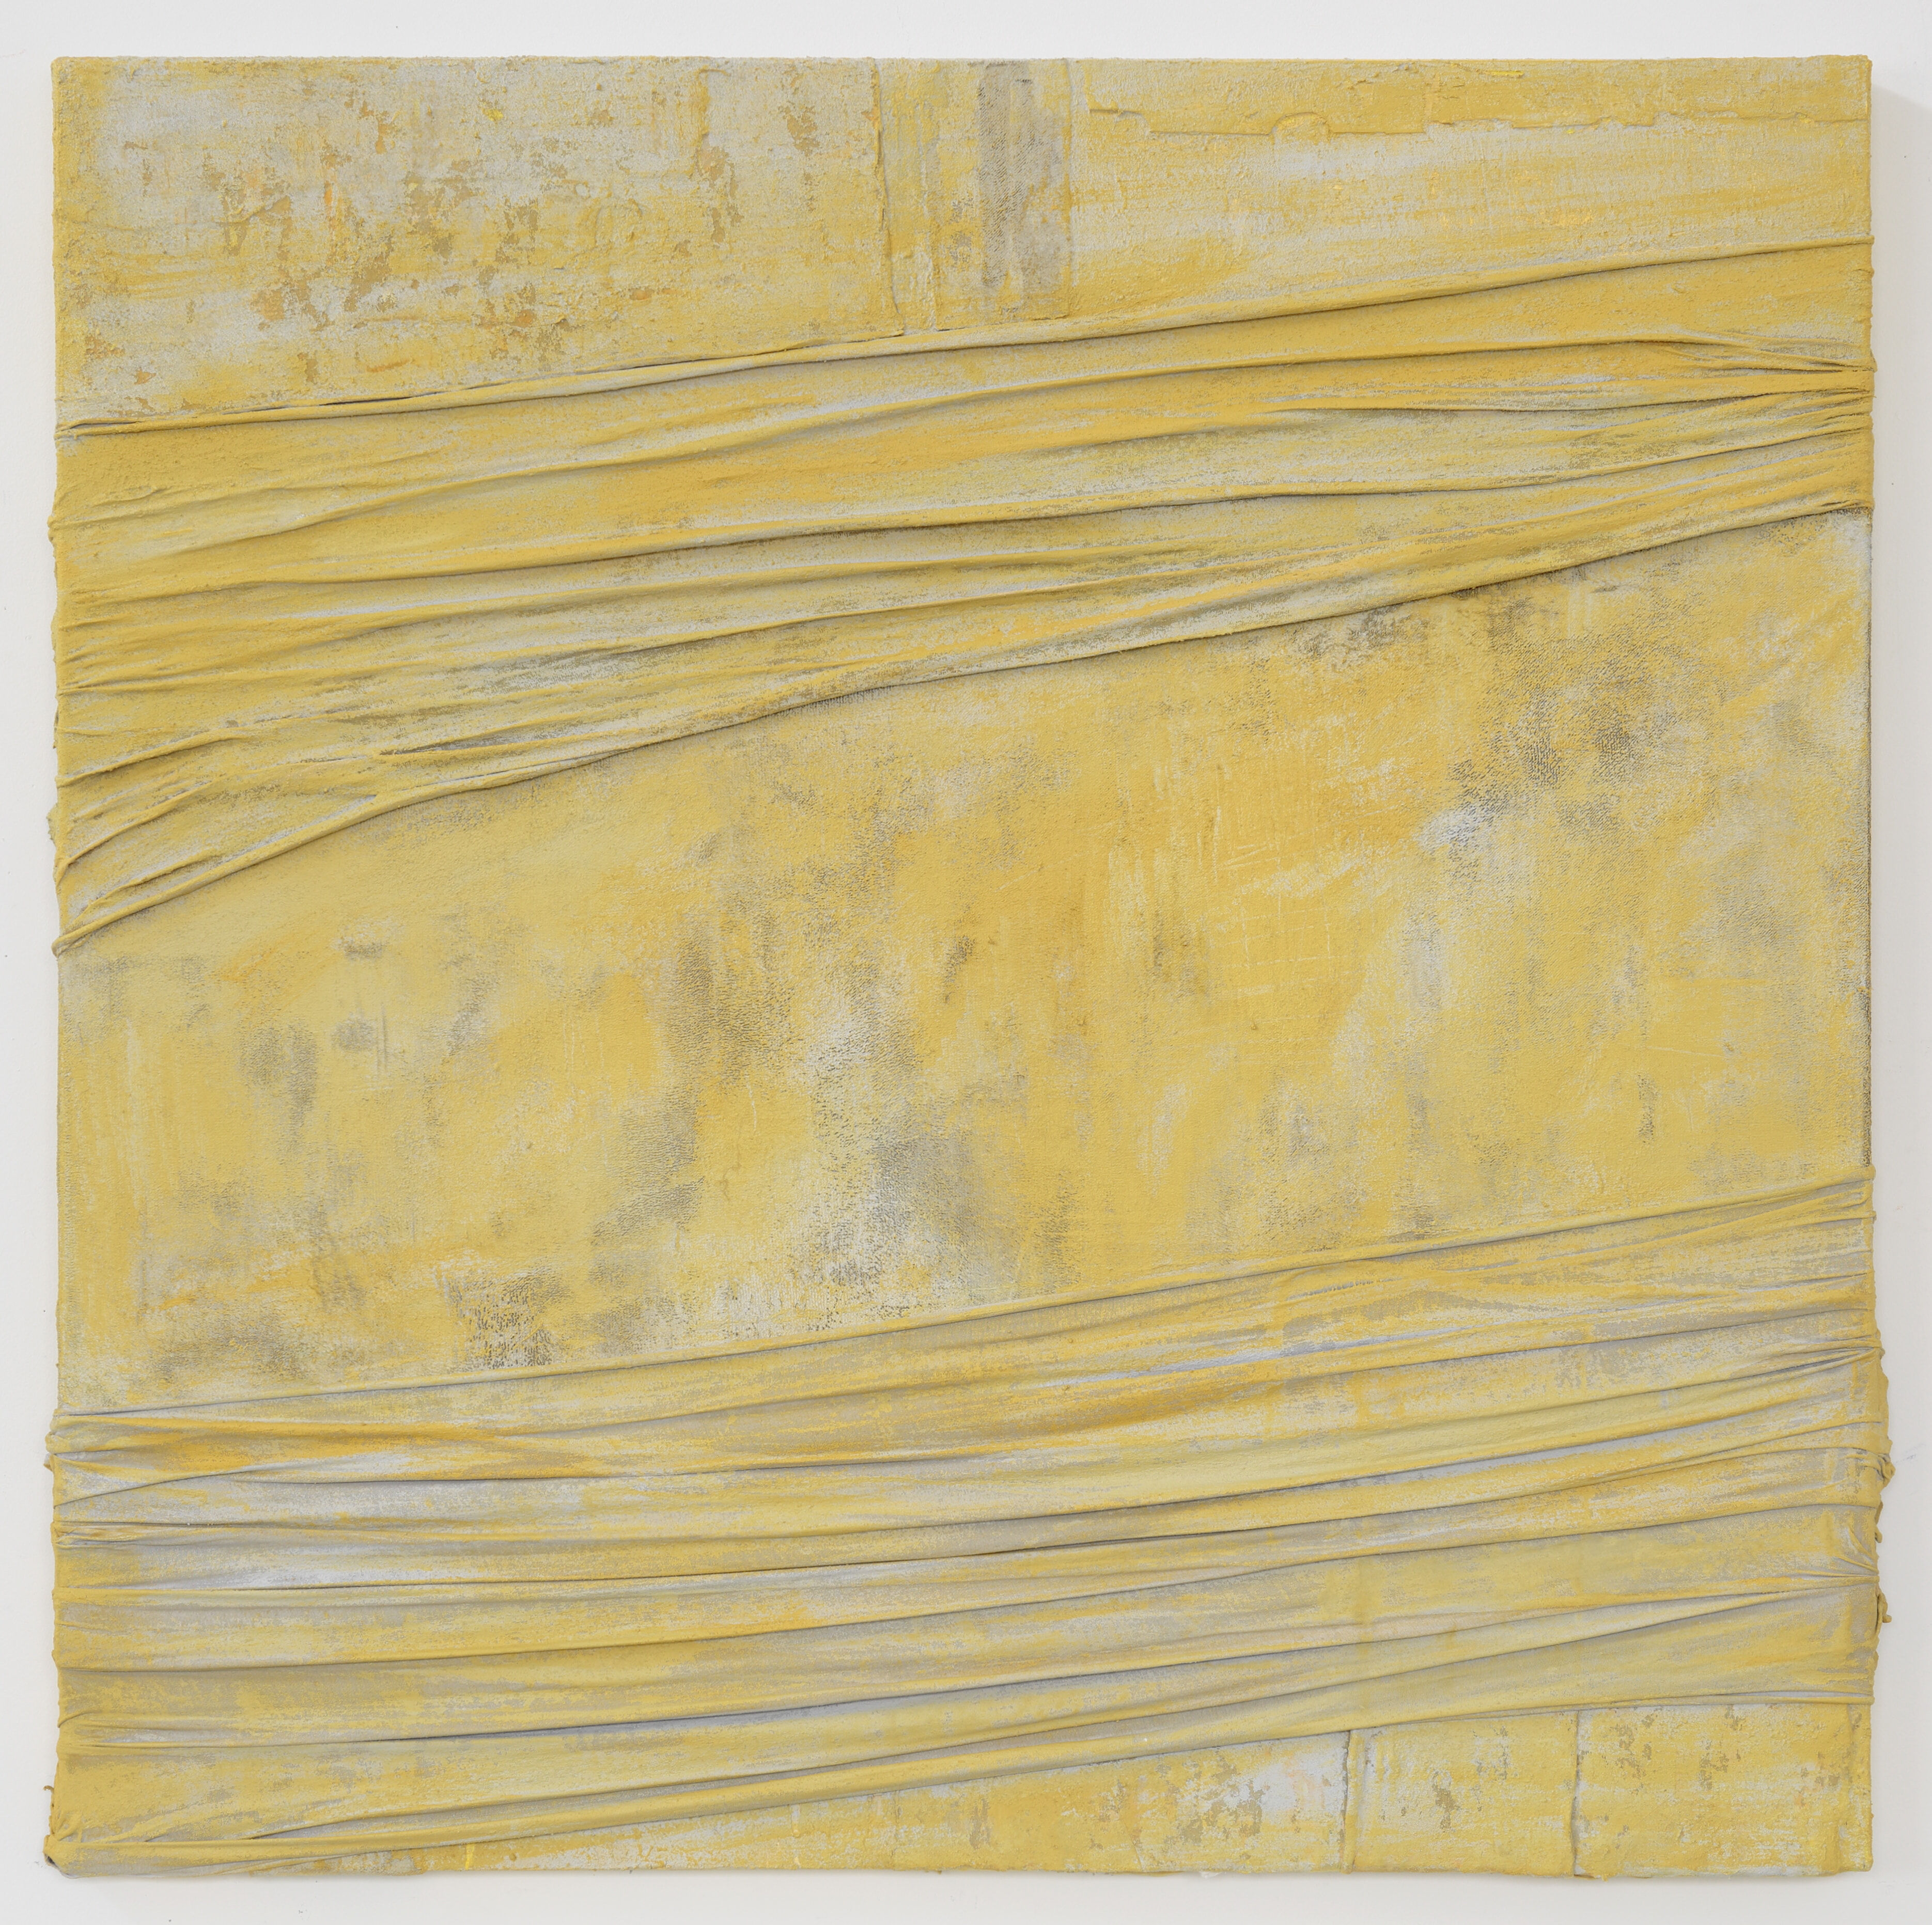 1.Anna Caione Yellow Pull & Wrap, 2018, Fabric & Mixed media on canvas, 100cmx100cm